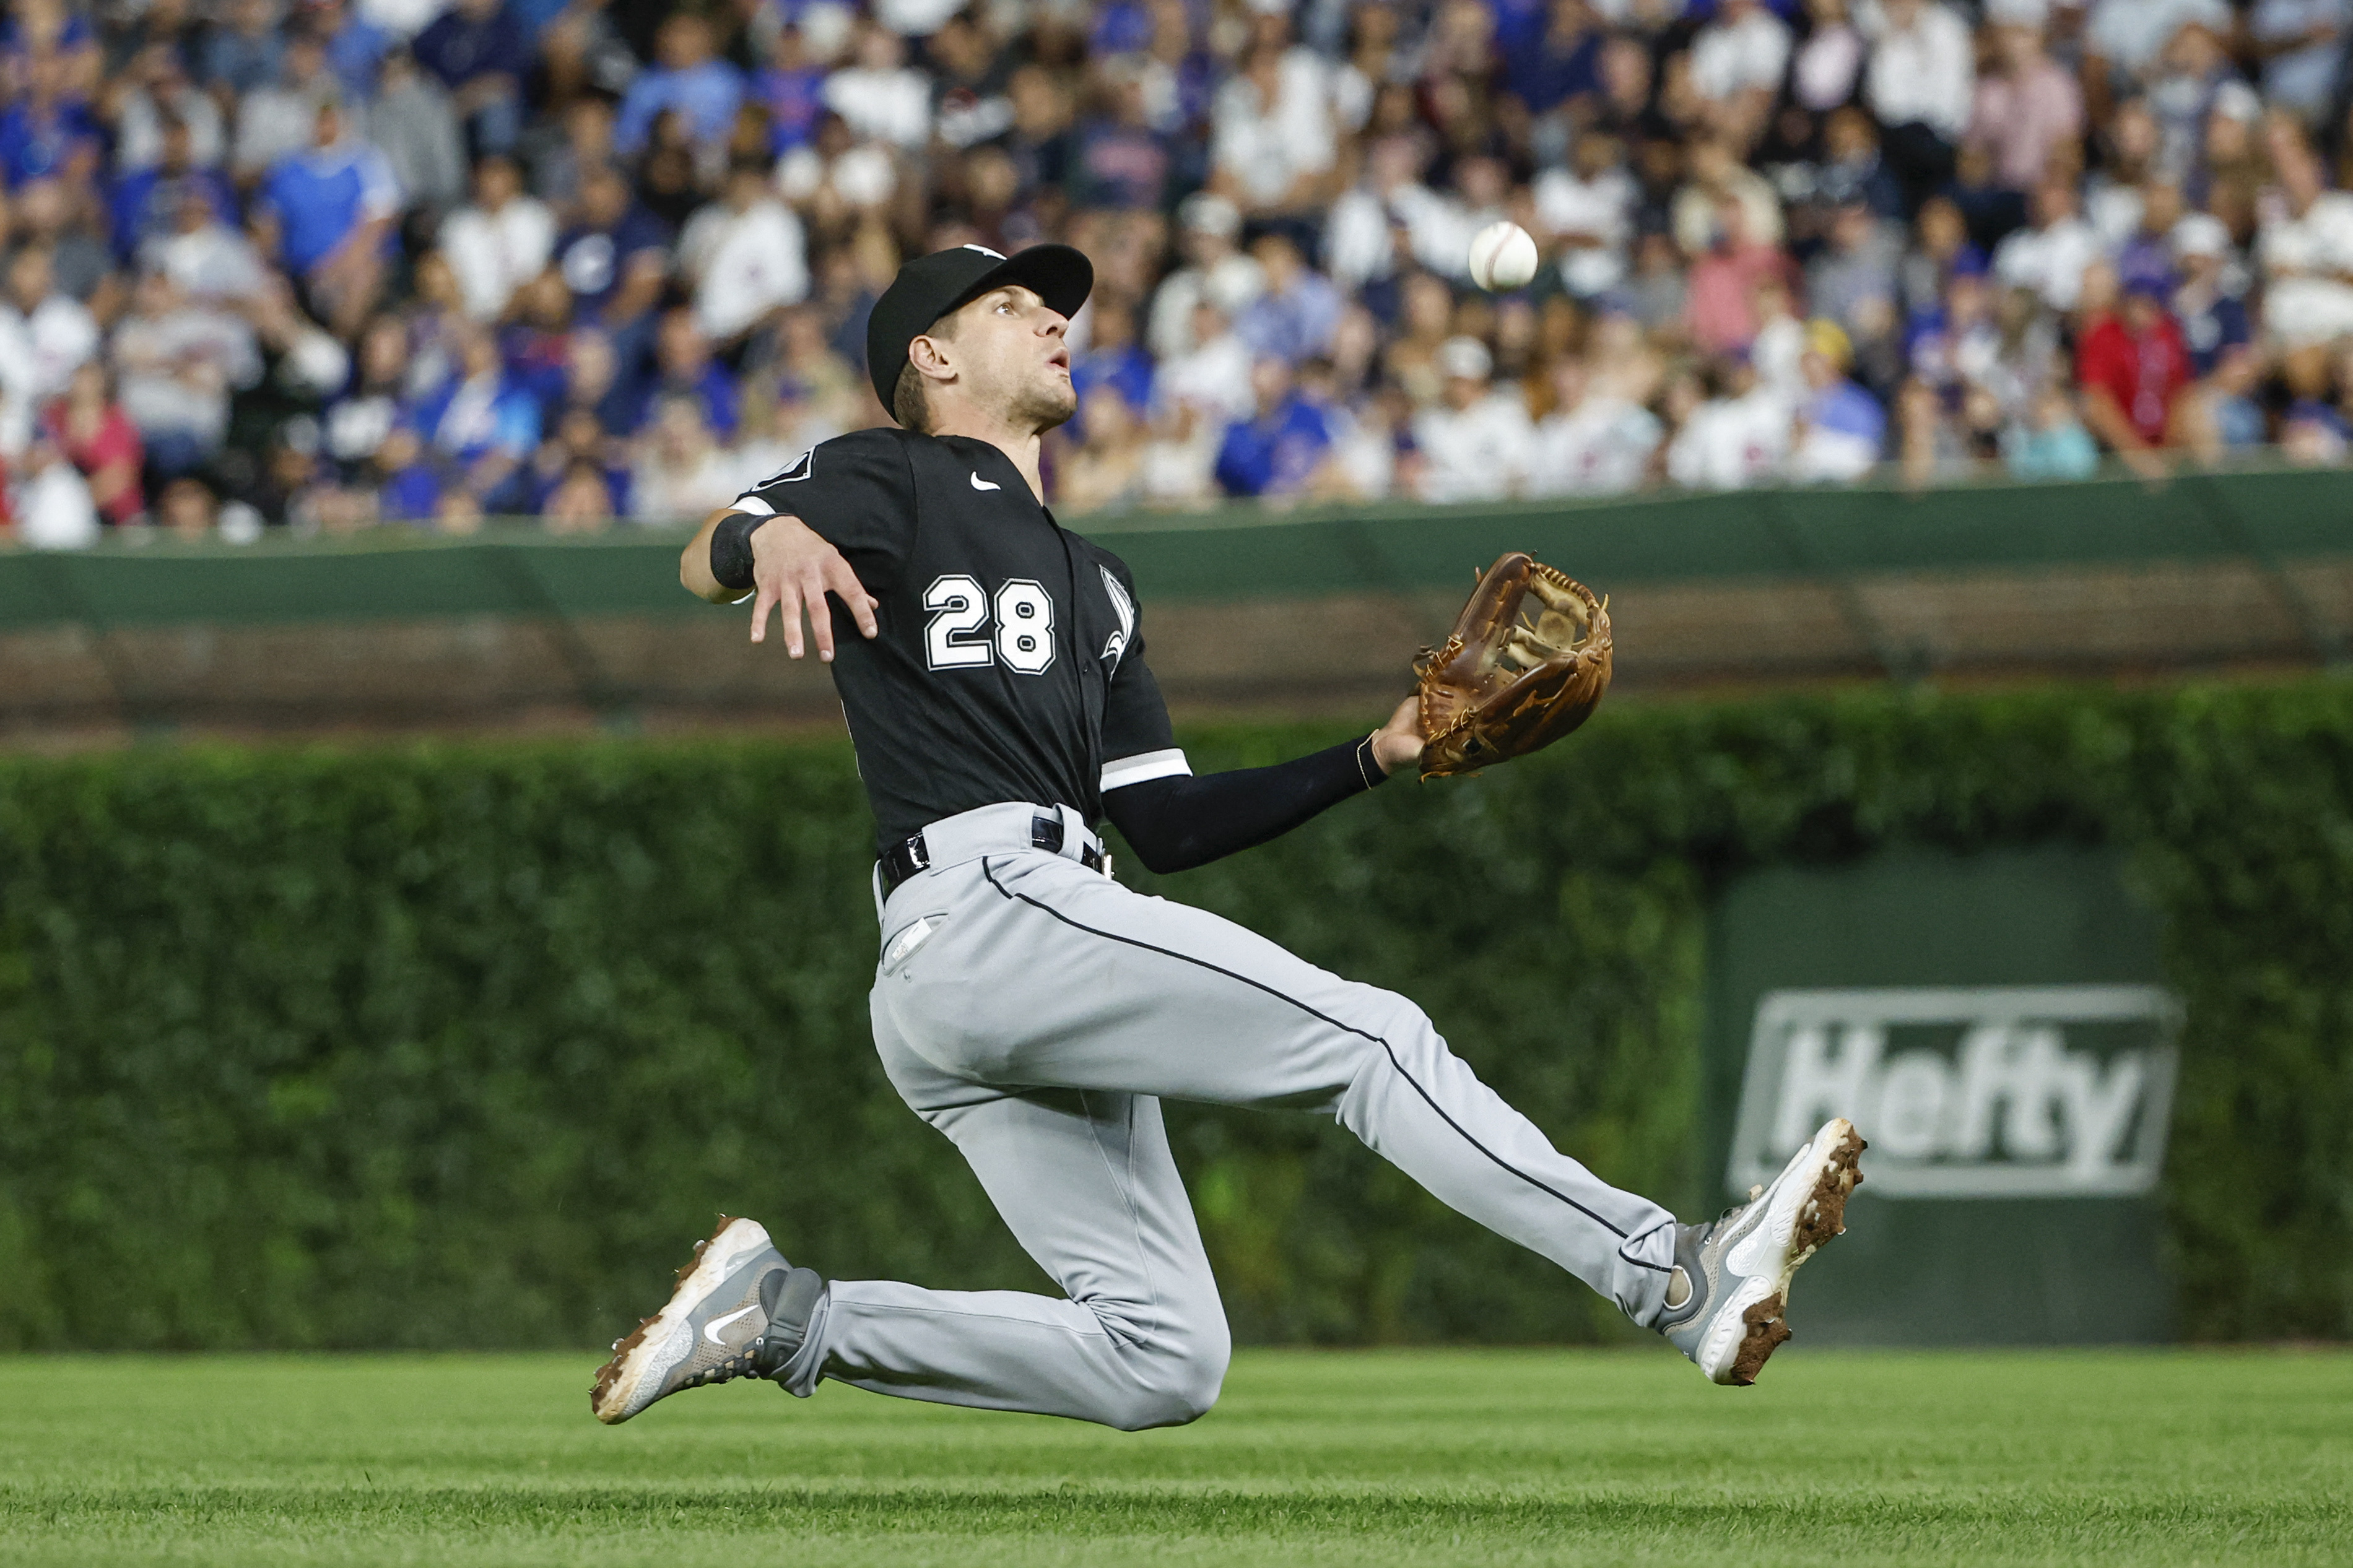 Chicago Crosstown Classic: Luis Robert Jr. delivers game-winning homer as  White Sox beat Cubs - Chicago Sun-Times